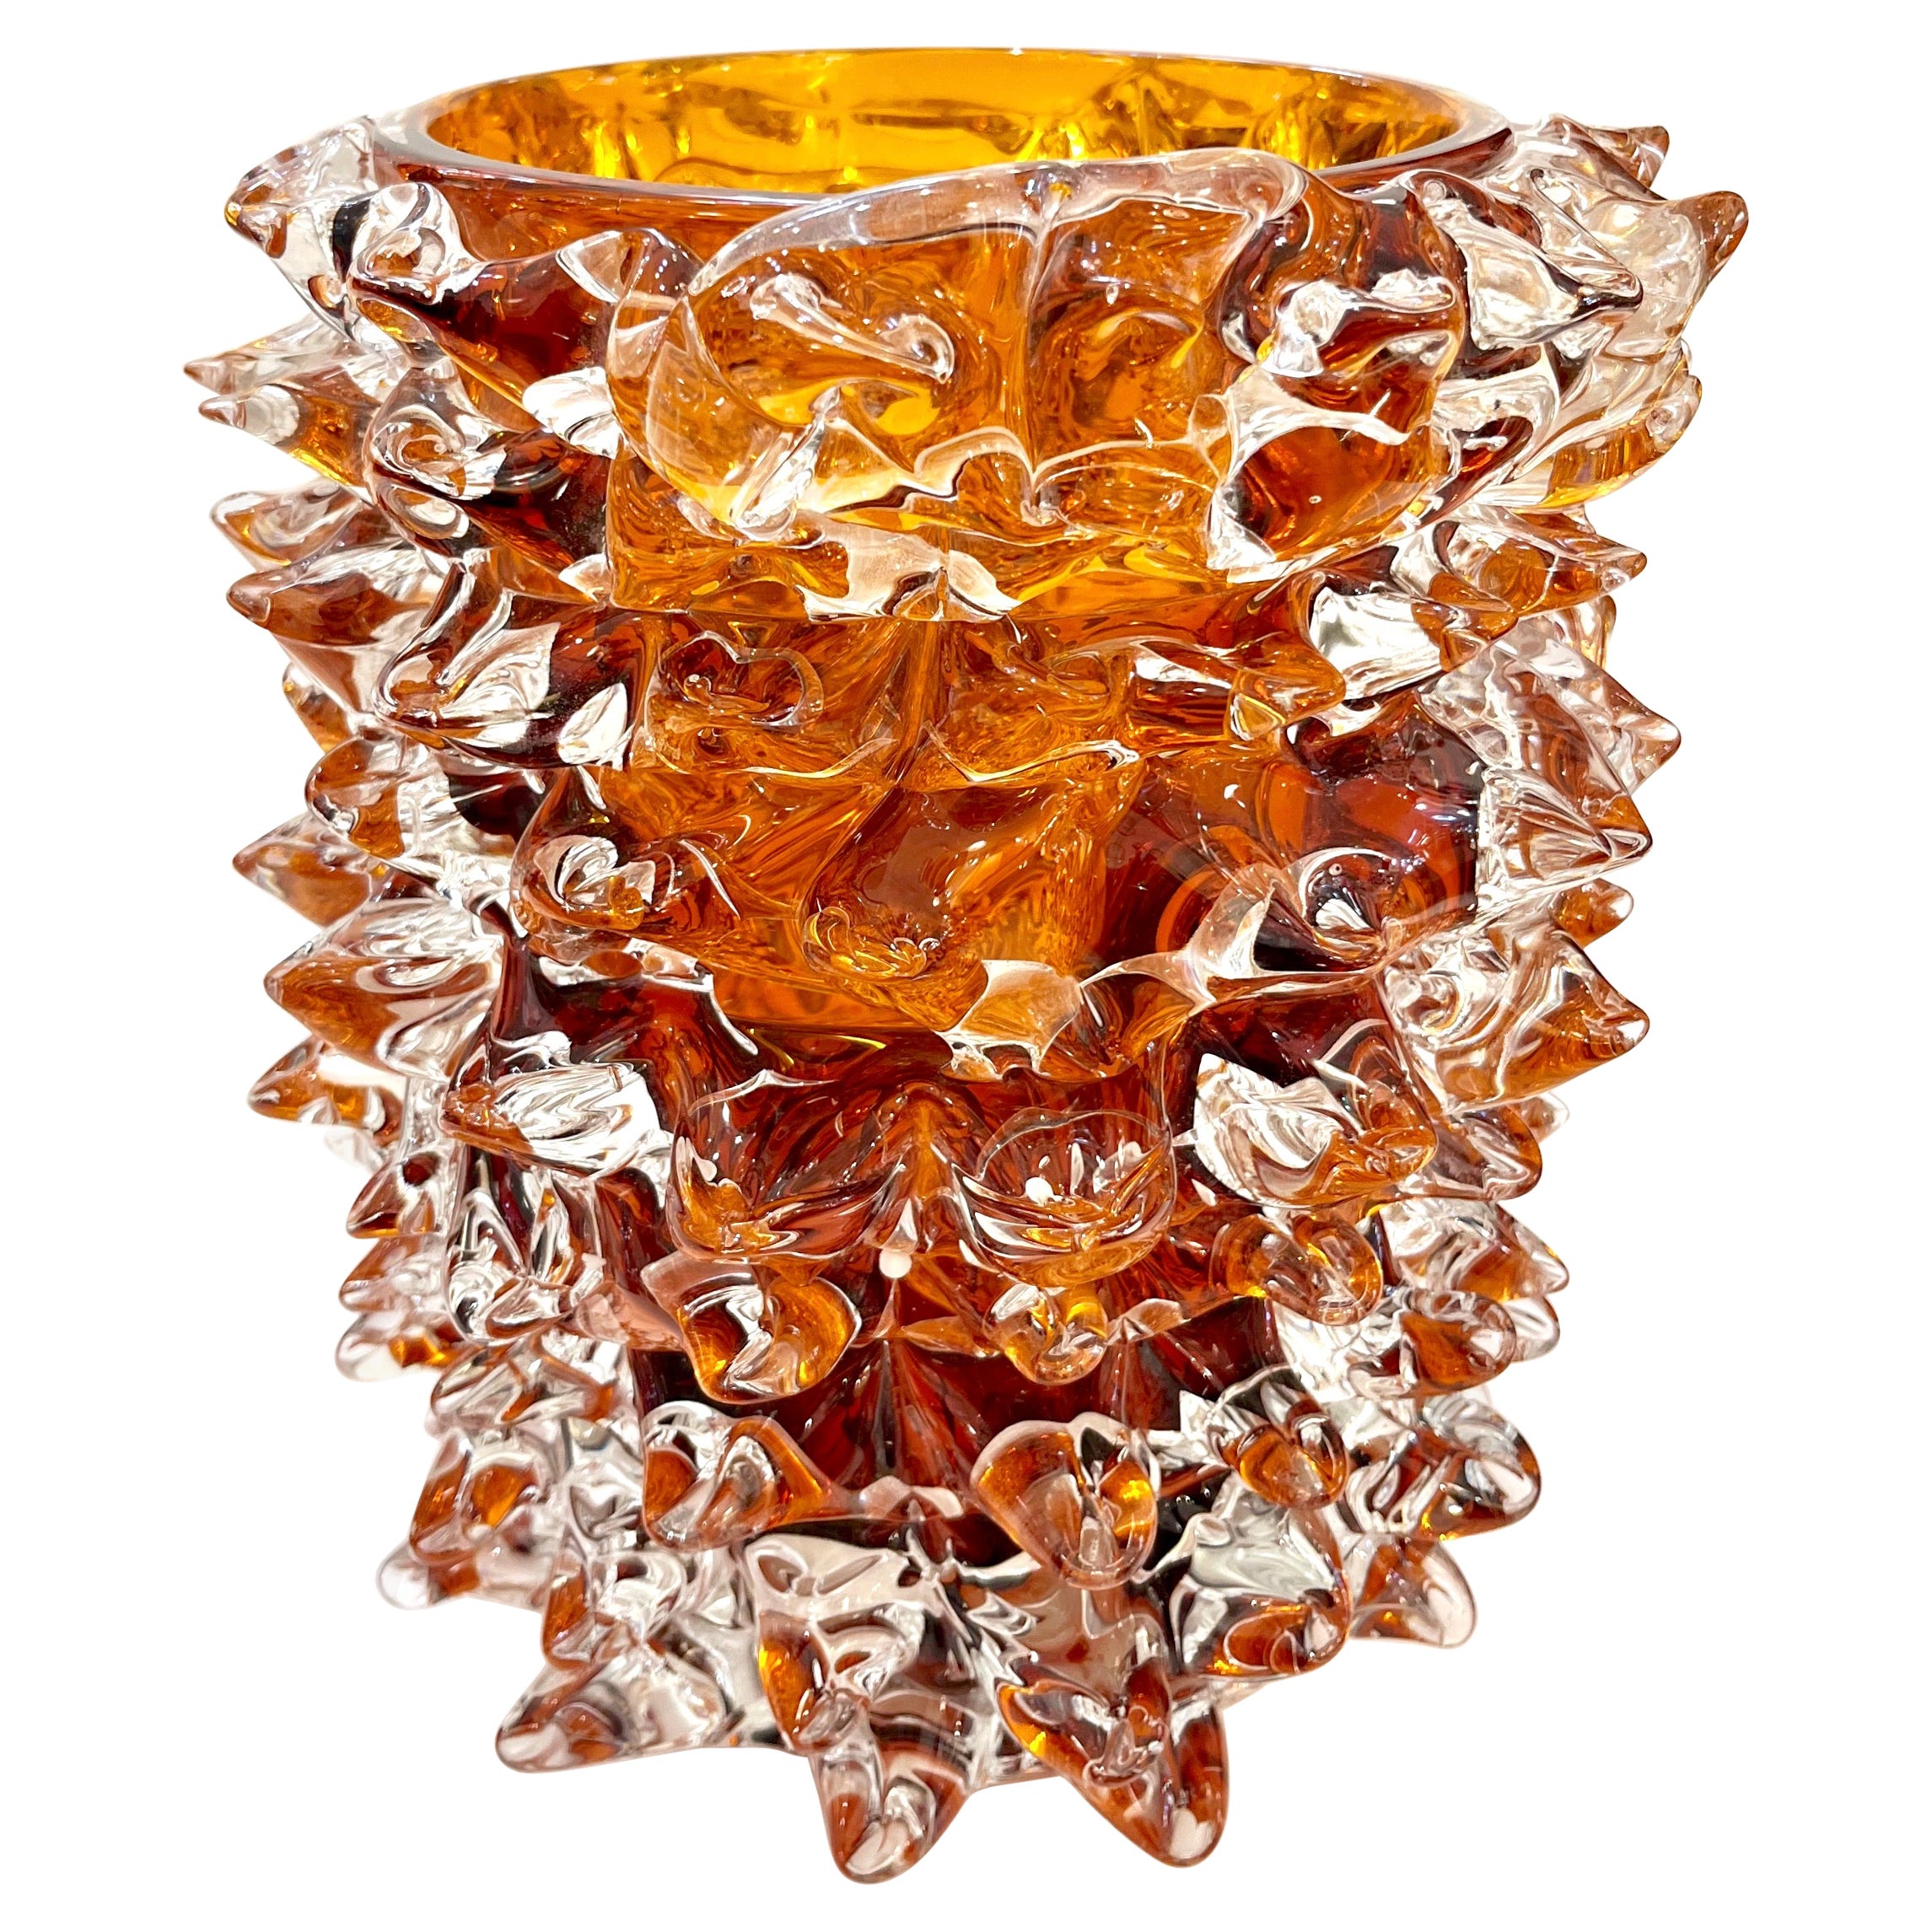 Contemporary Venetian modernist vase, signed Alberto Dona Murano, with a modern organic shape, in a sophisticated amber honey gold glowing color, sommerso in a layer of crystal clear blown Murano glass worked with the Barovier style ROSTRATO